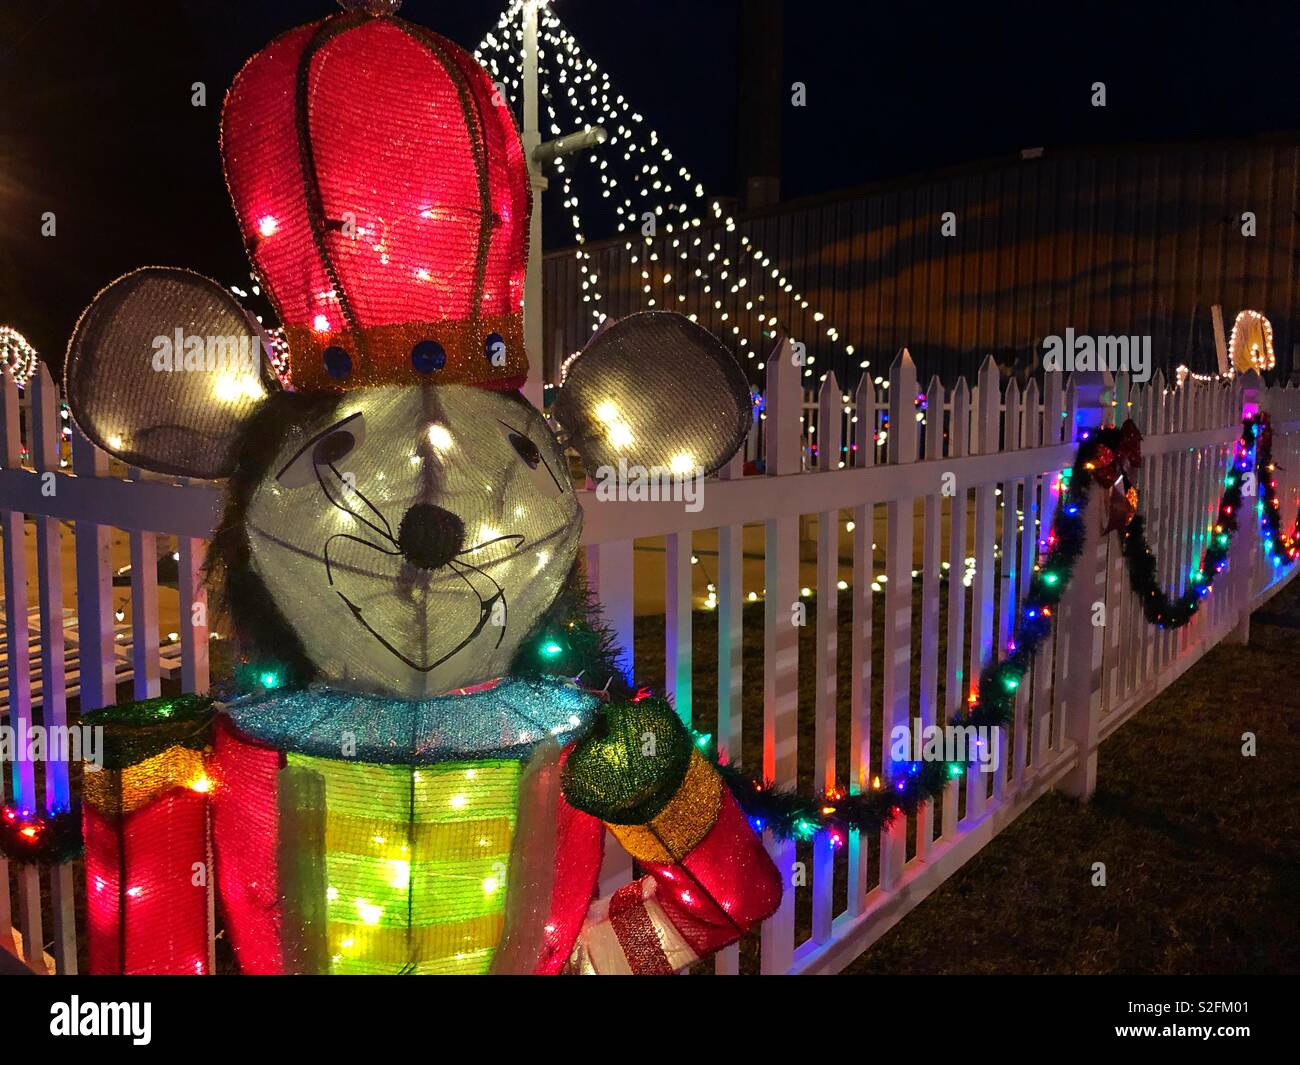 The Nutcracker Mouse King stands on a lawn at night, Dec. 23, 2018, in Bayou La Batre, Alabama. Stock Photo